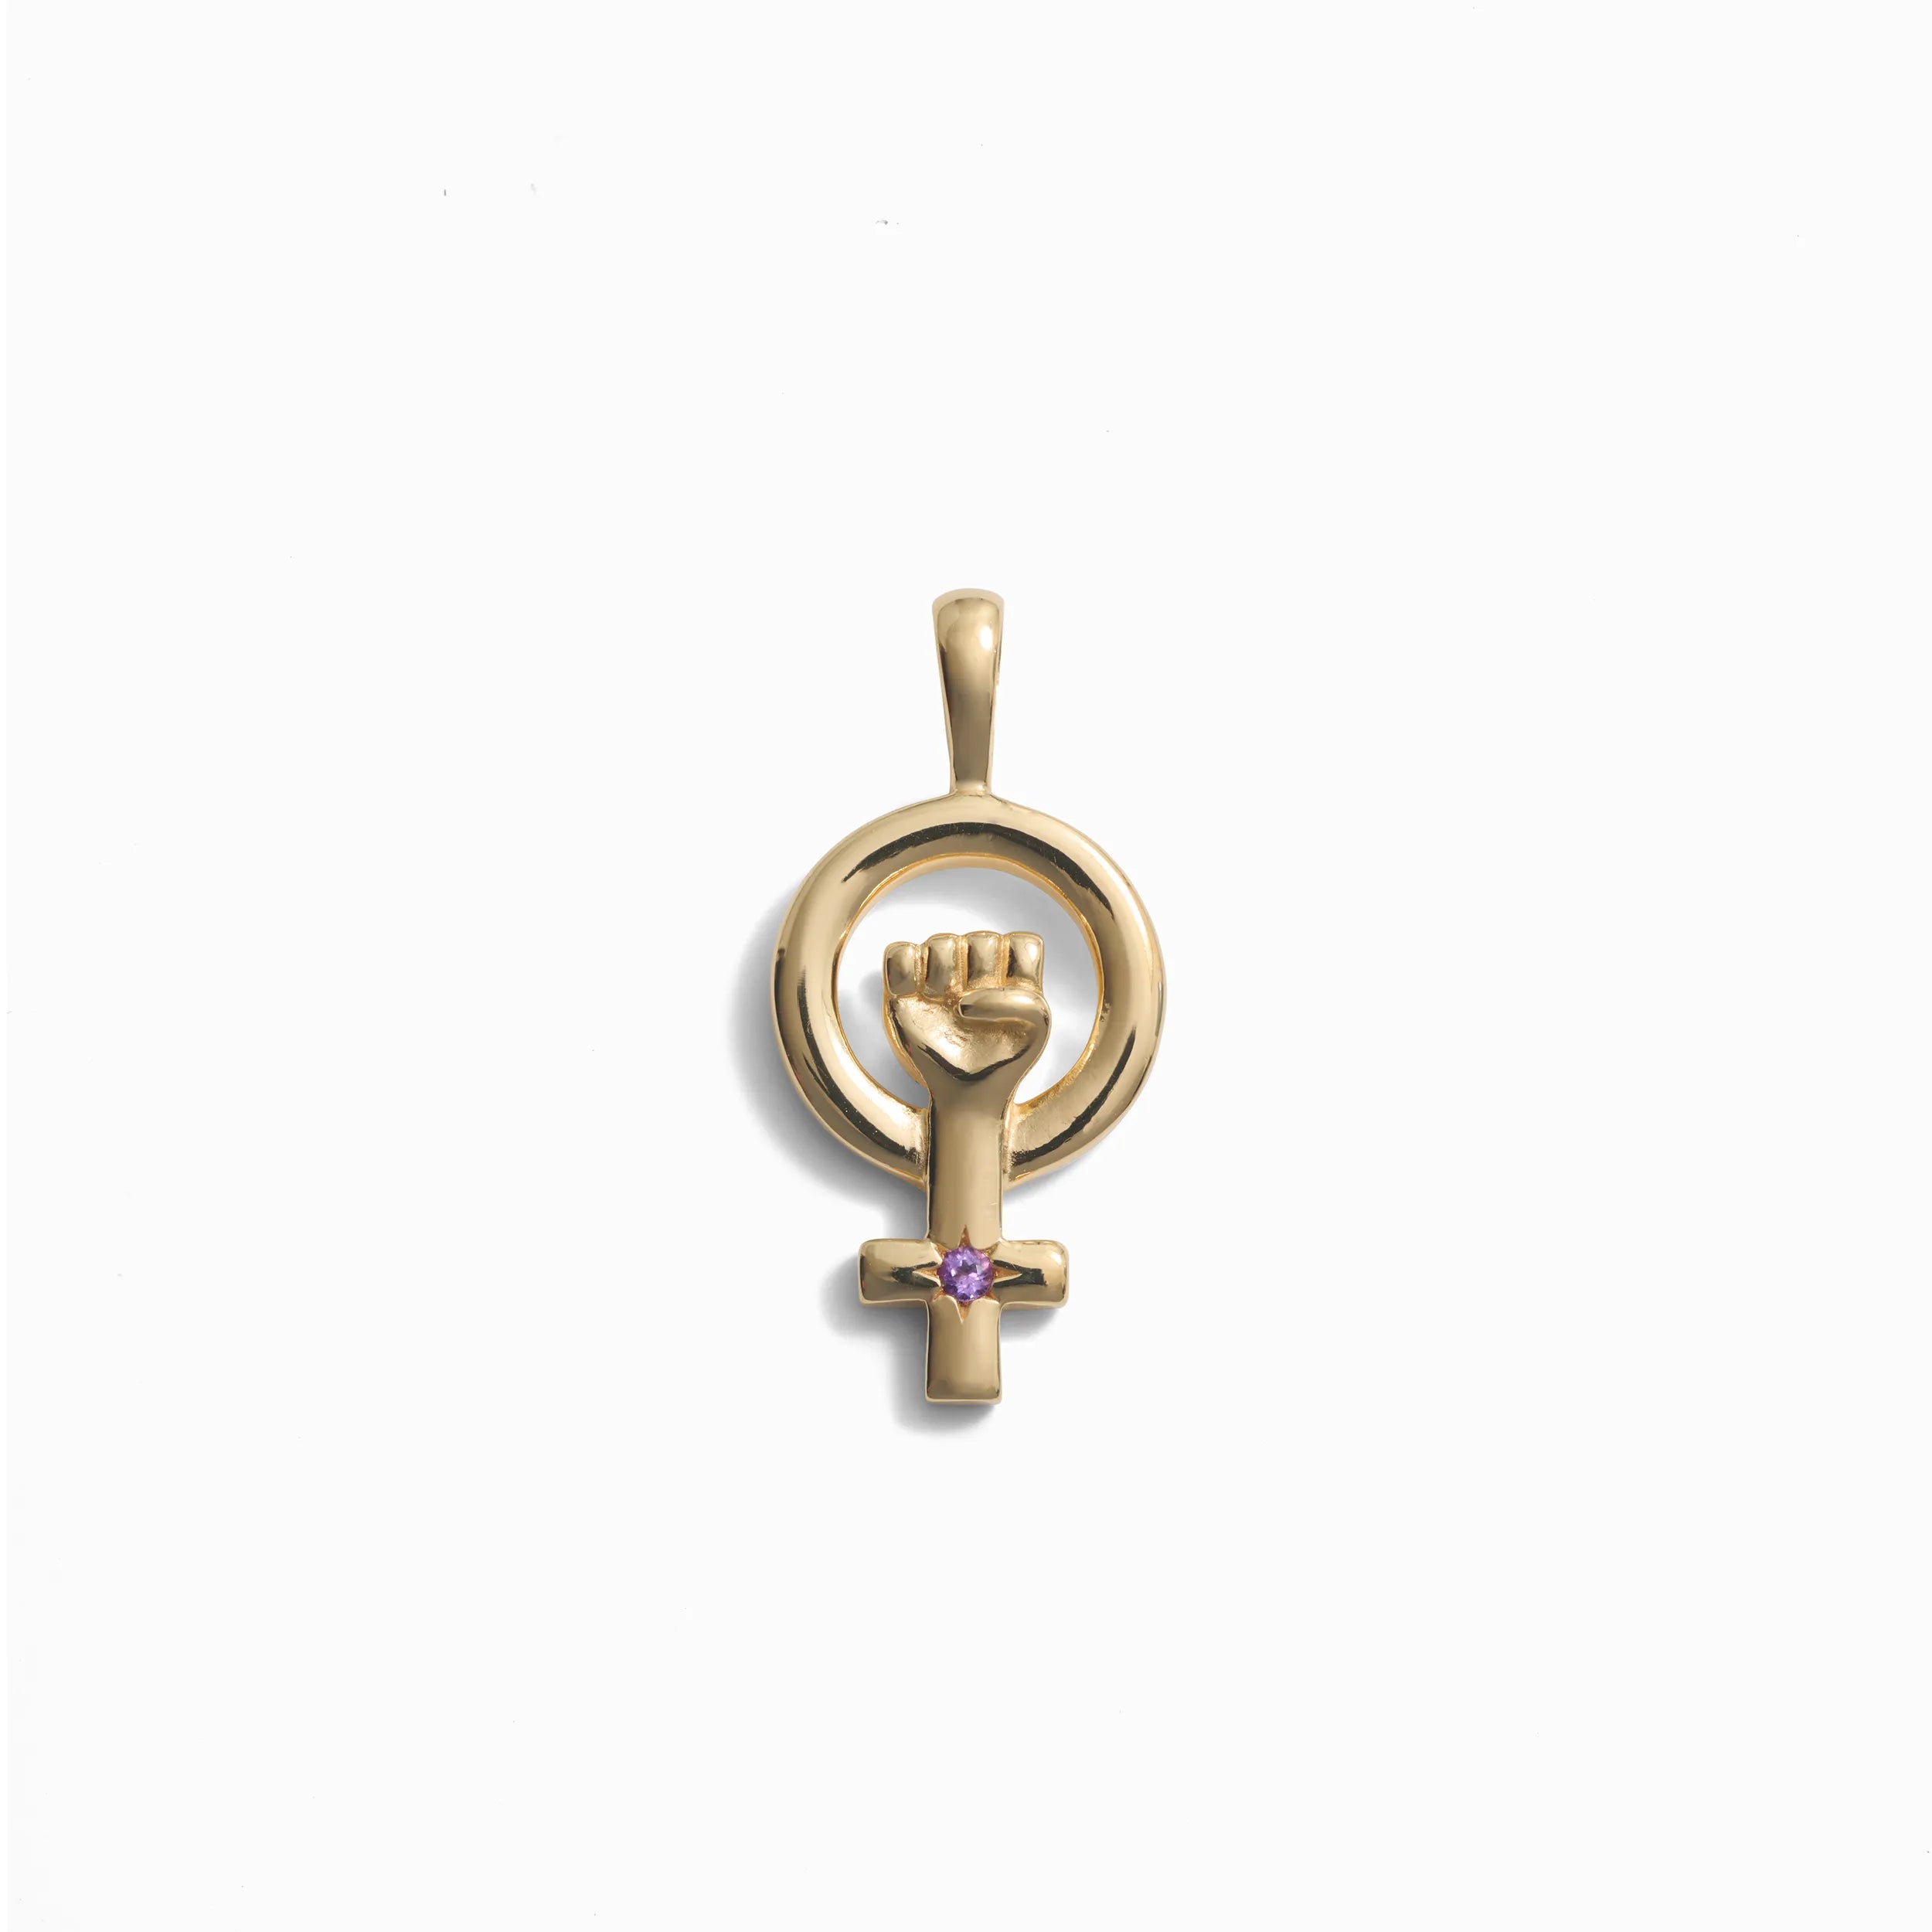 Woman Power Necklace